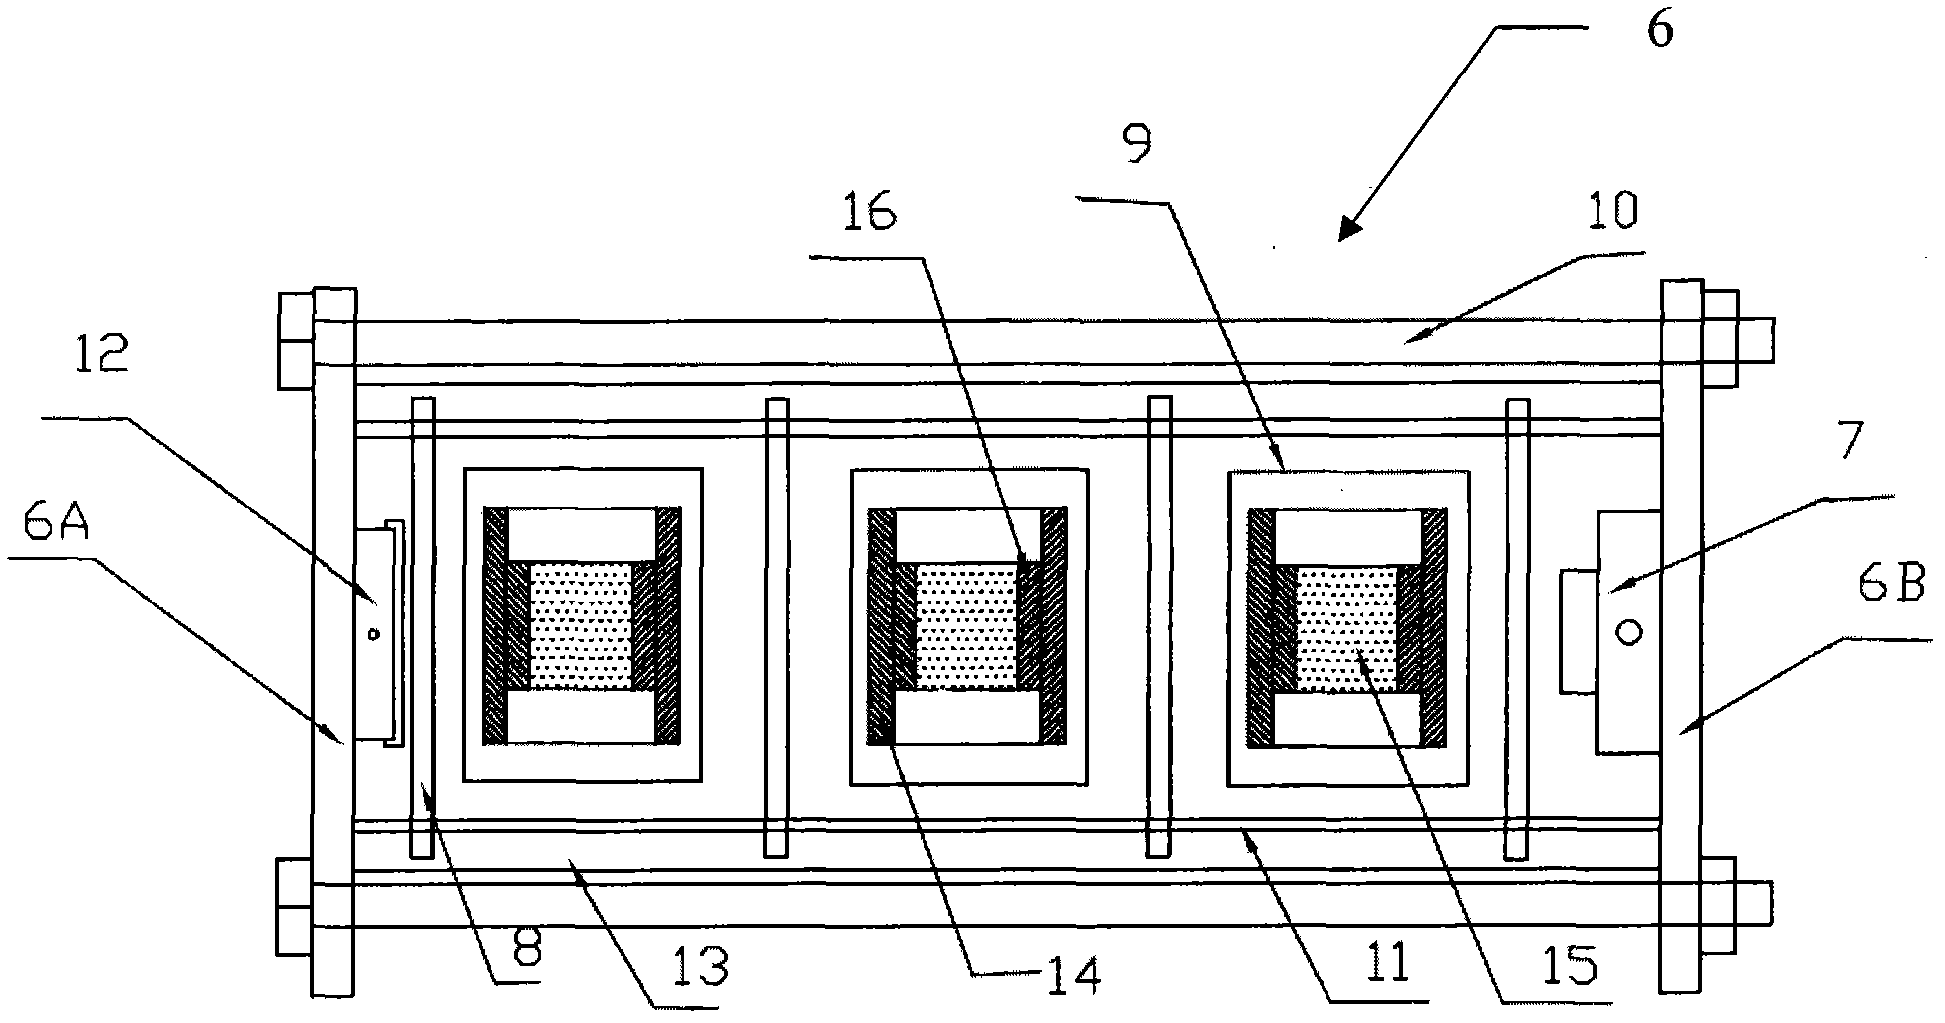 Fatigue loading device for reinforced concrete duration test